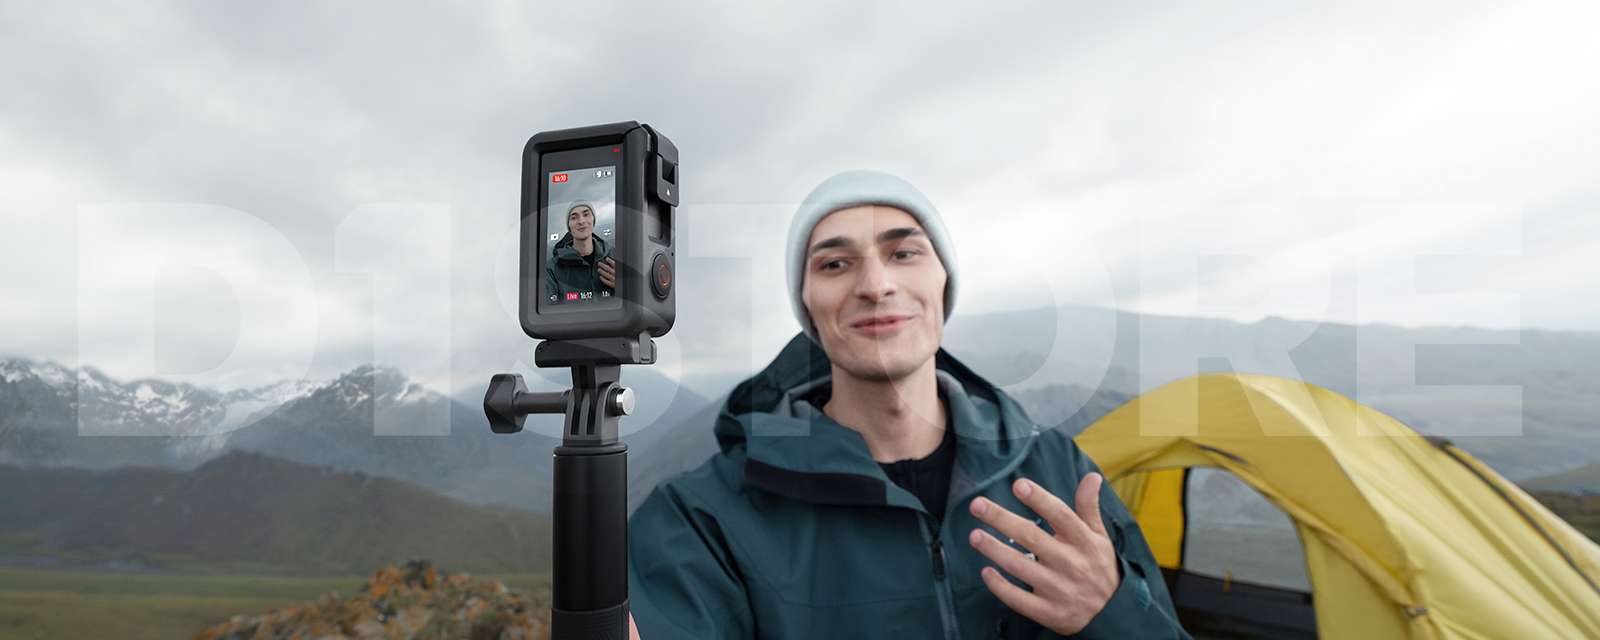 DJI Osmo Action 3 Standard Combo vs Adventure Combo: Which Should I Buy? | D1 Lounge